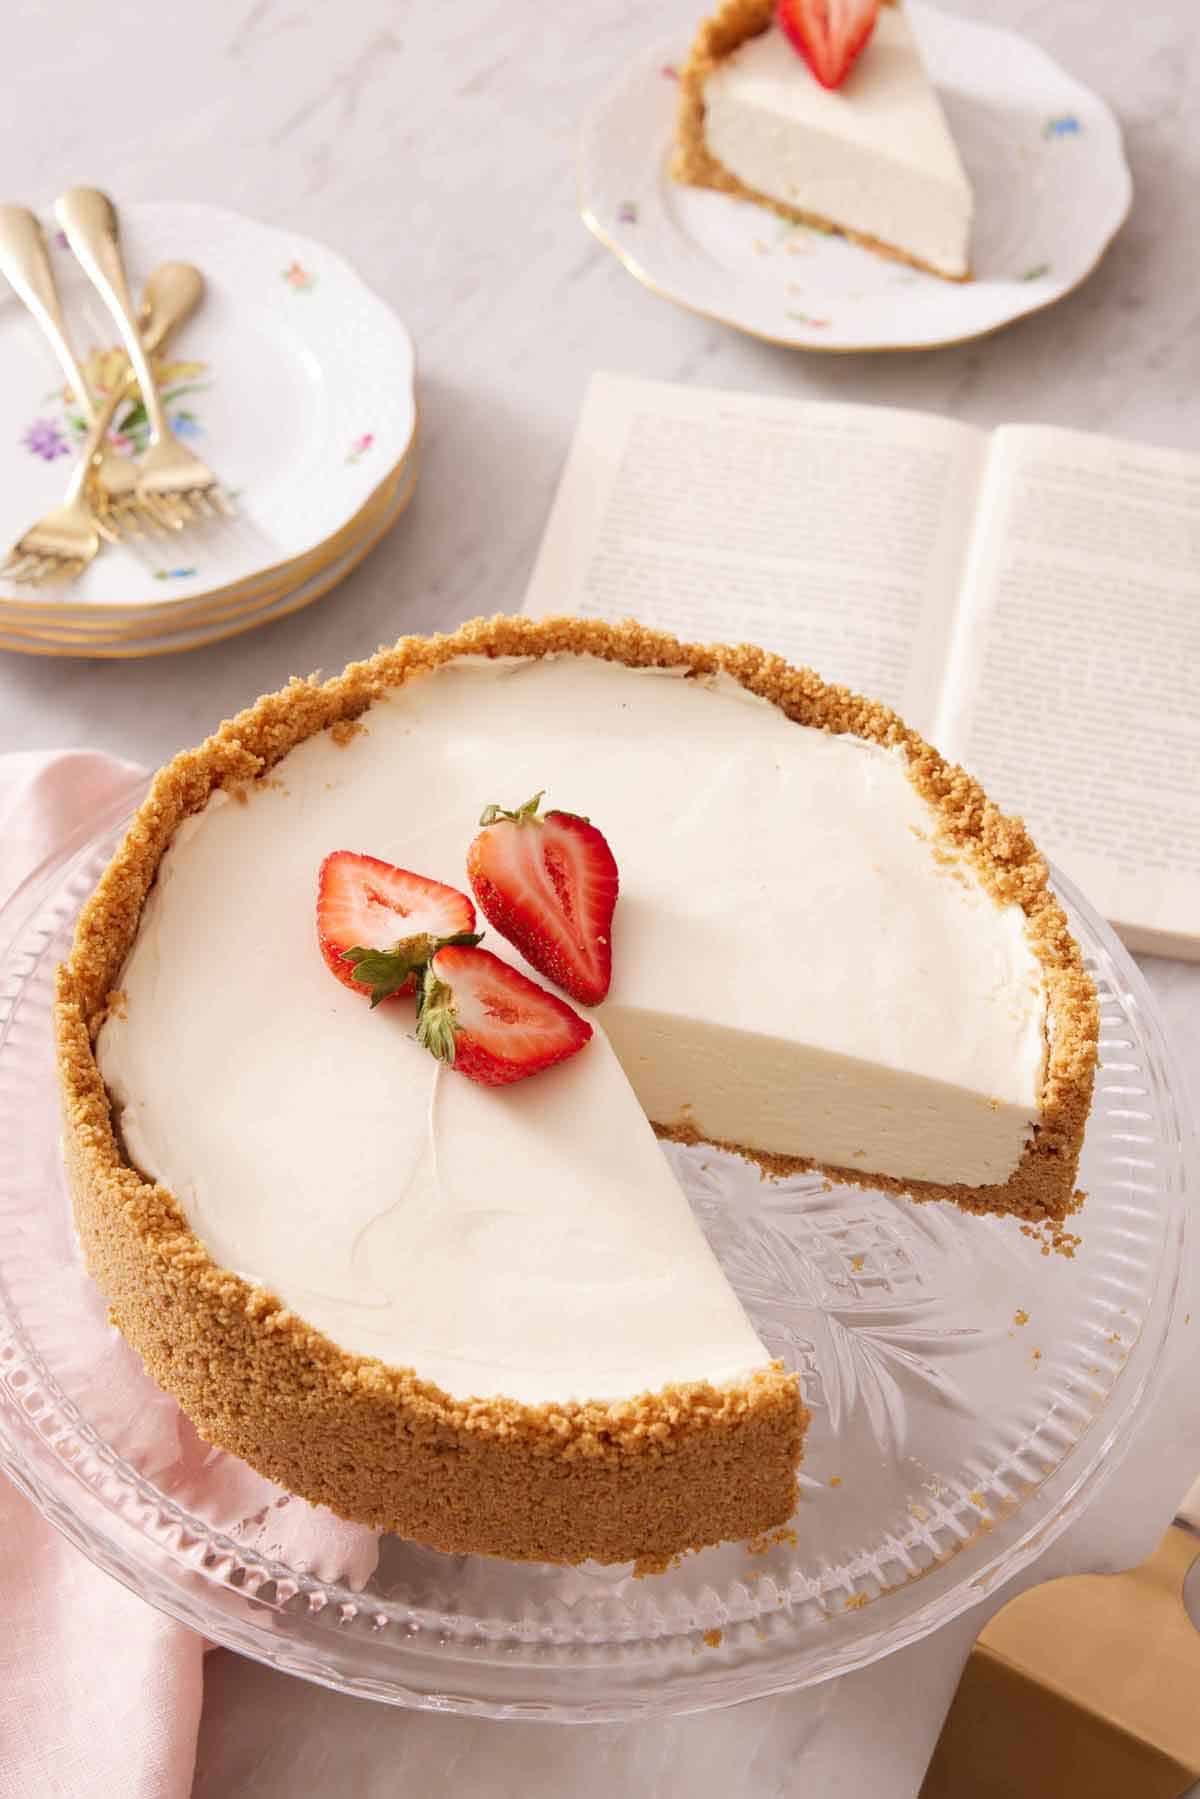 A cake stand with a no bake cheesecake with three pieces of strawberries on top with a slice cut out. An opened book and slice of cake in the background with some plates and forks.